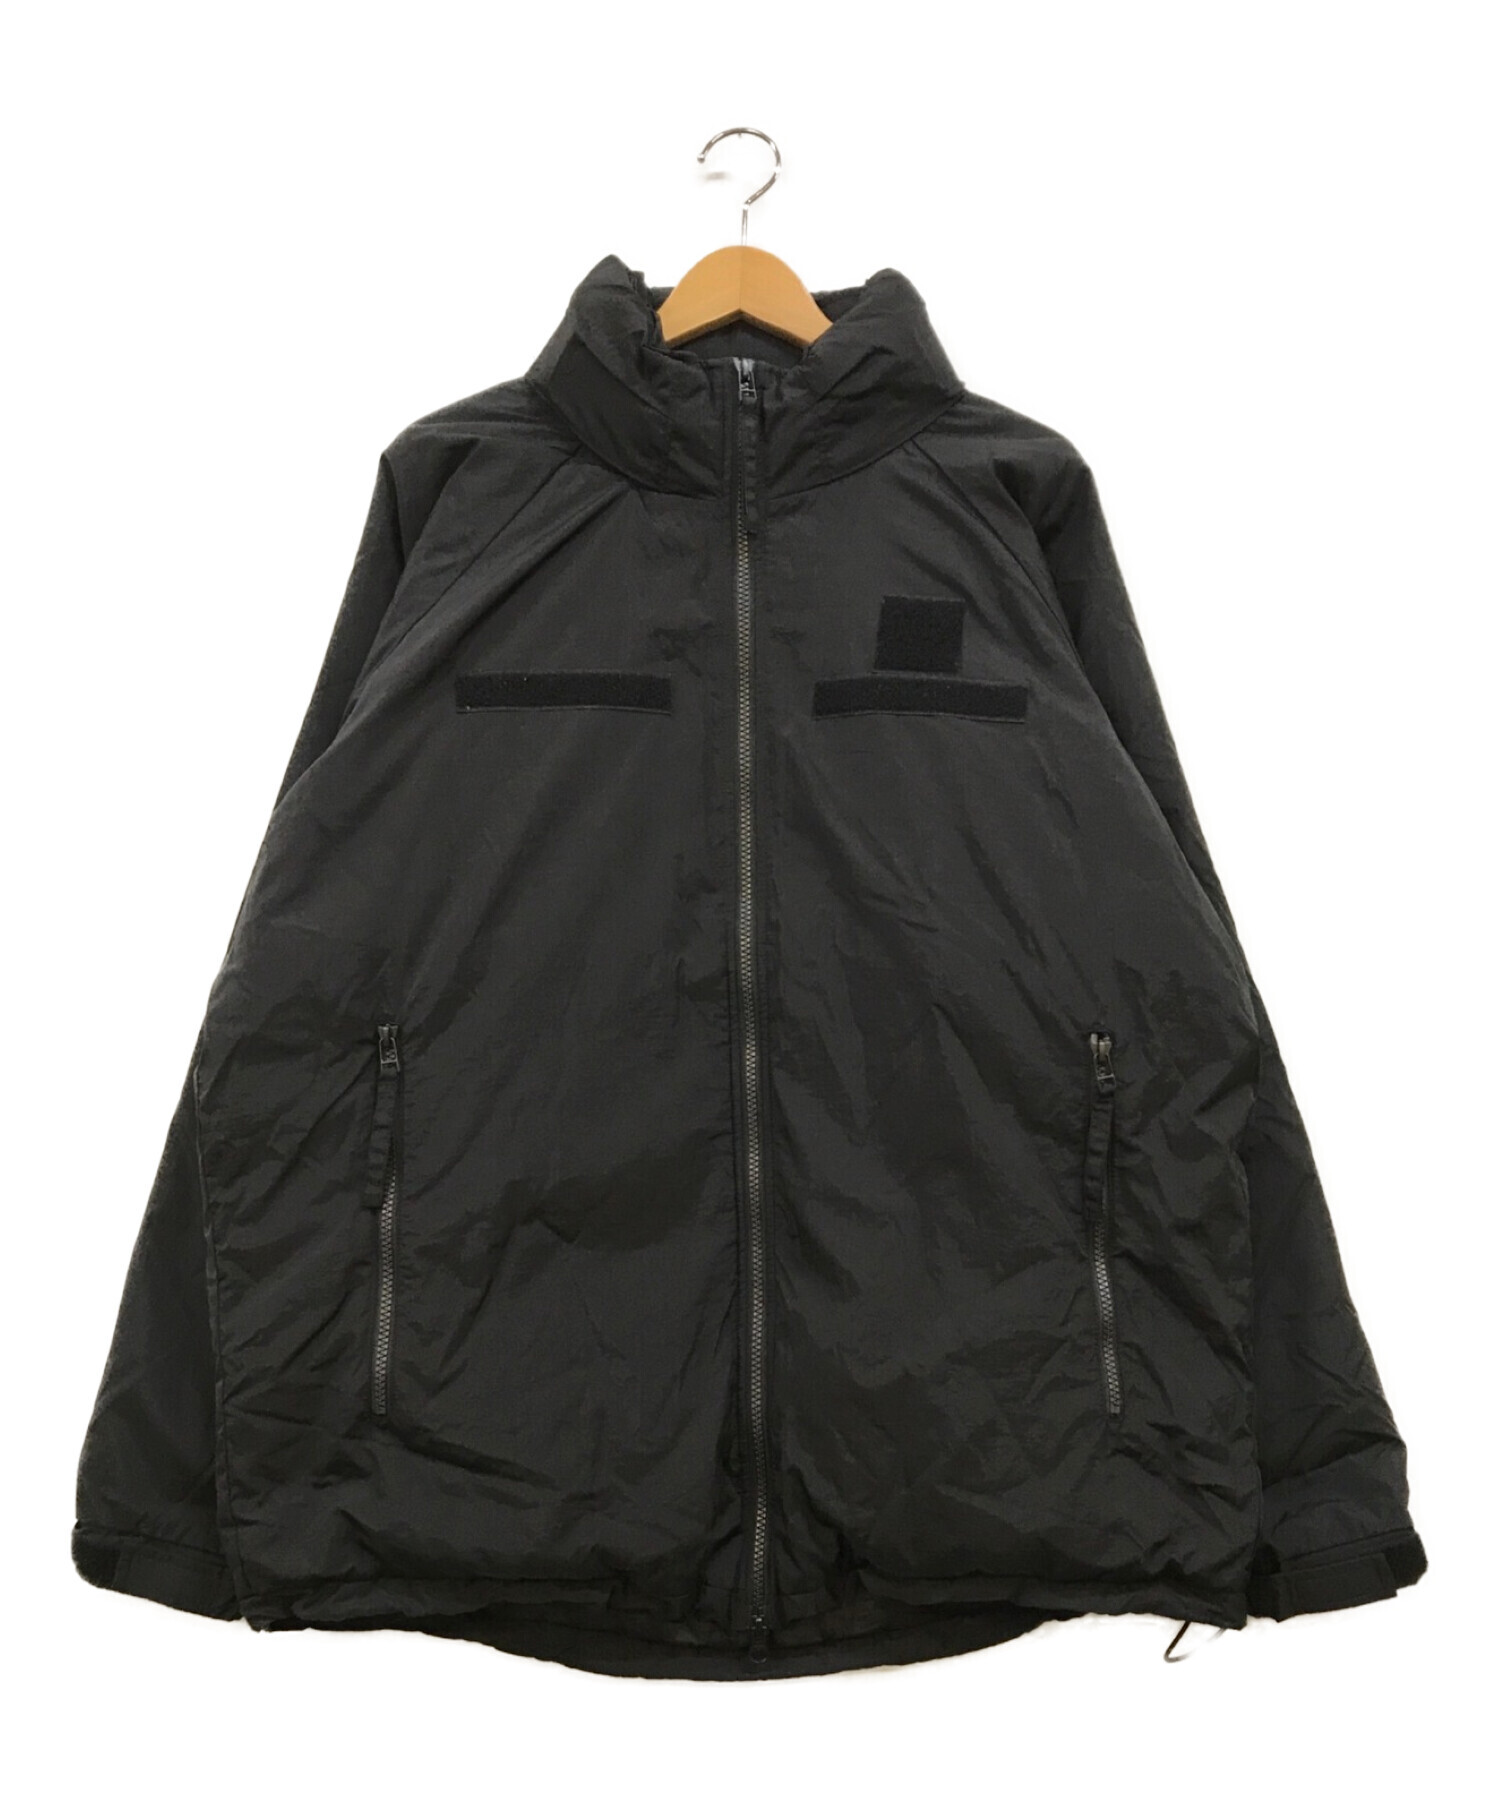 TAION MILITALY LEVEL7 JACKET  ECWCS